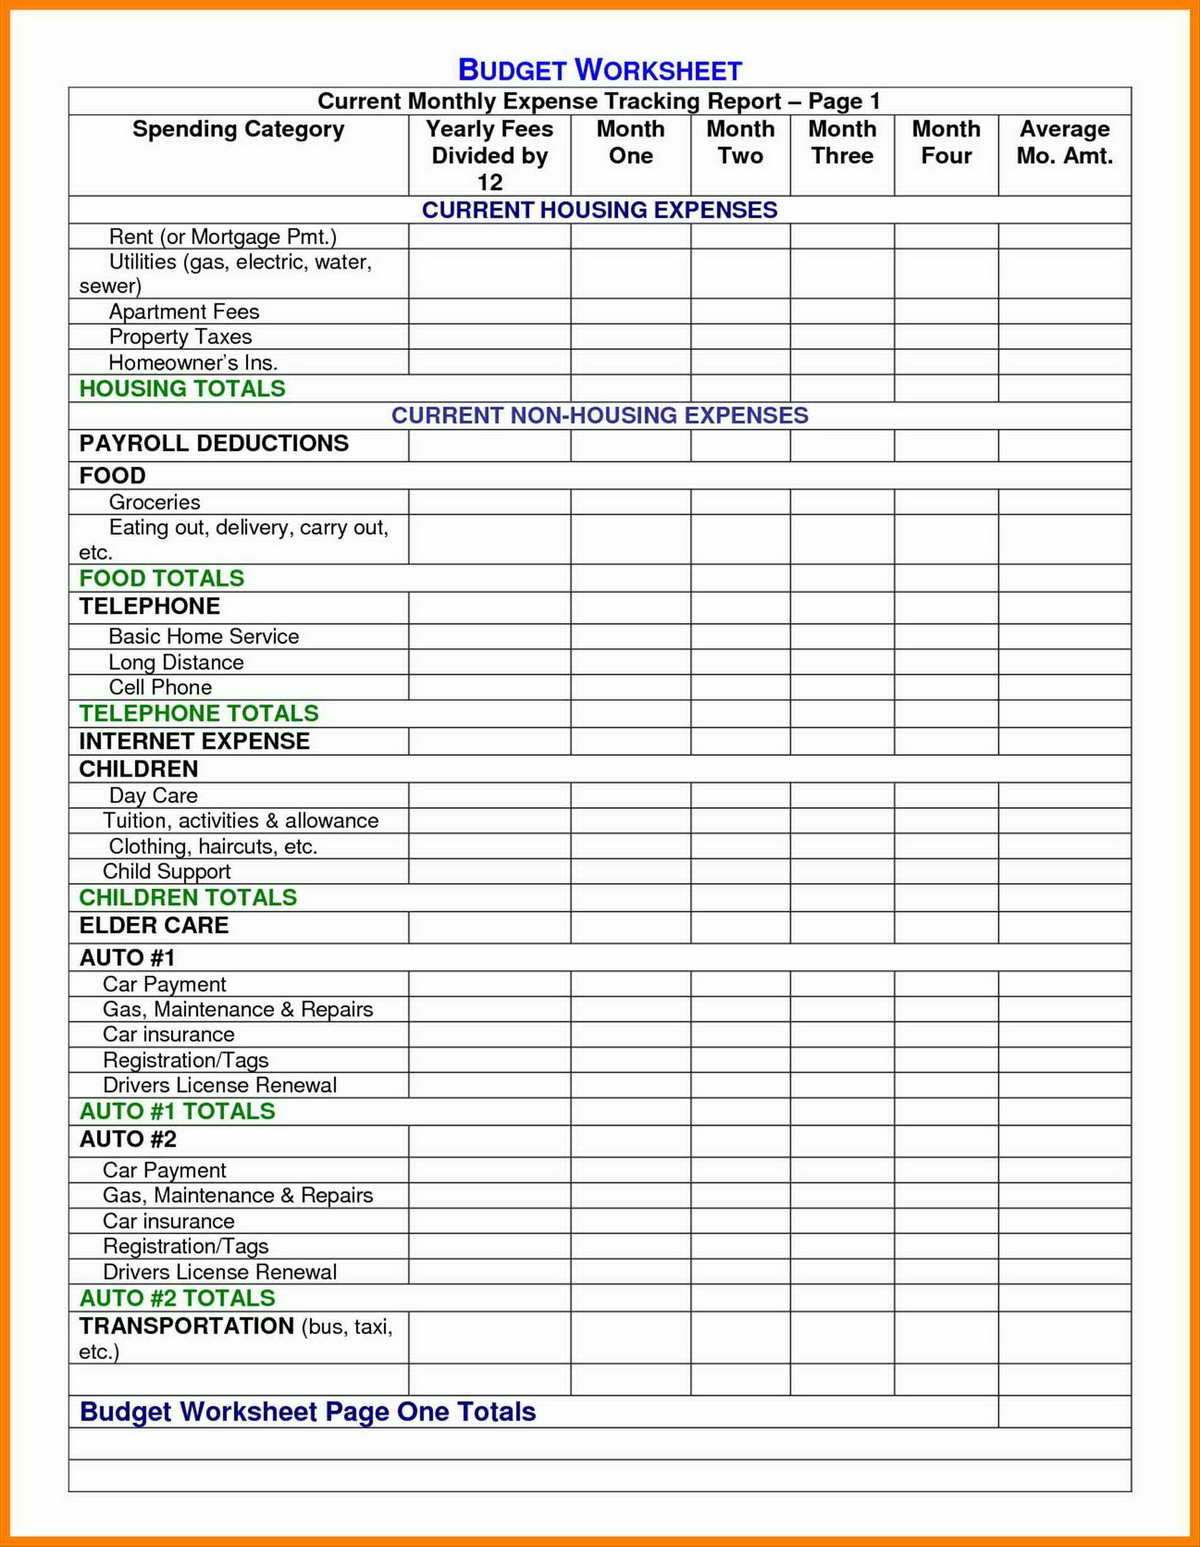 income and expense basic free template for non profit